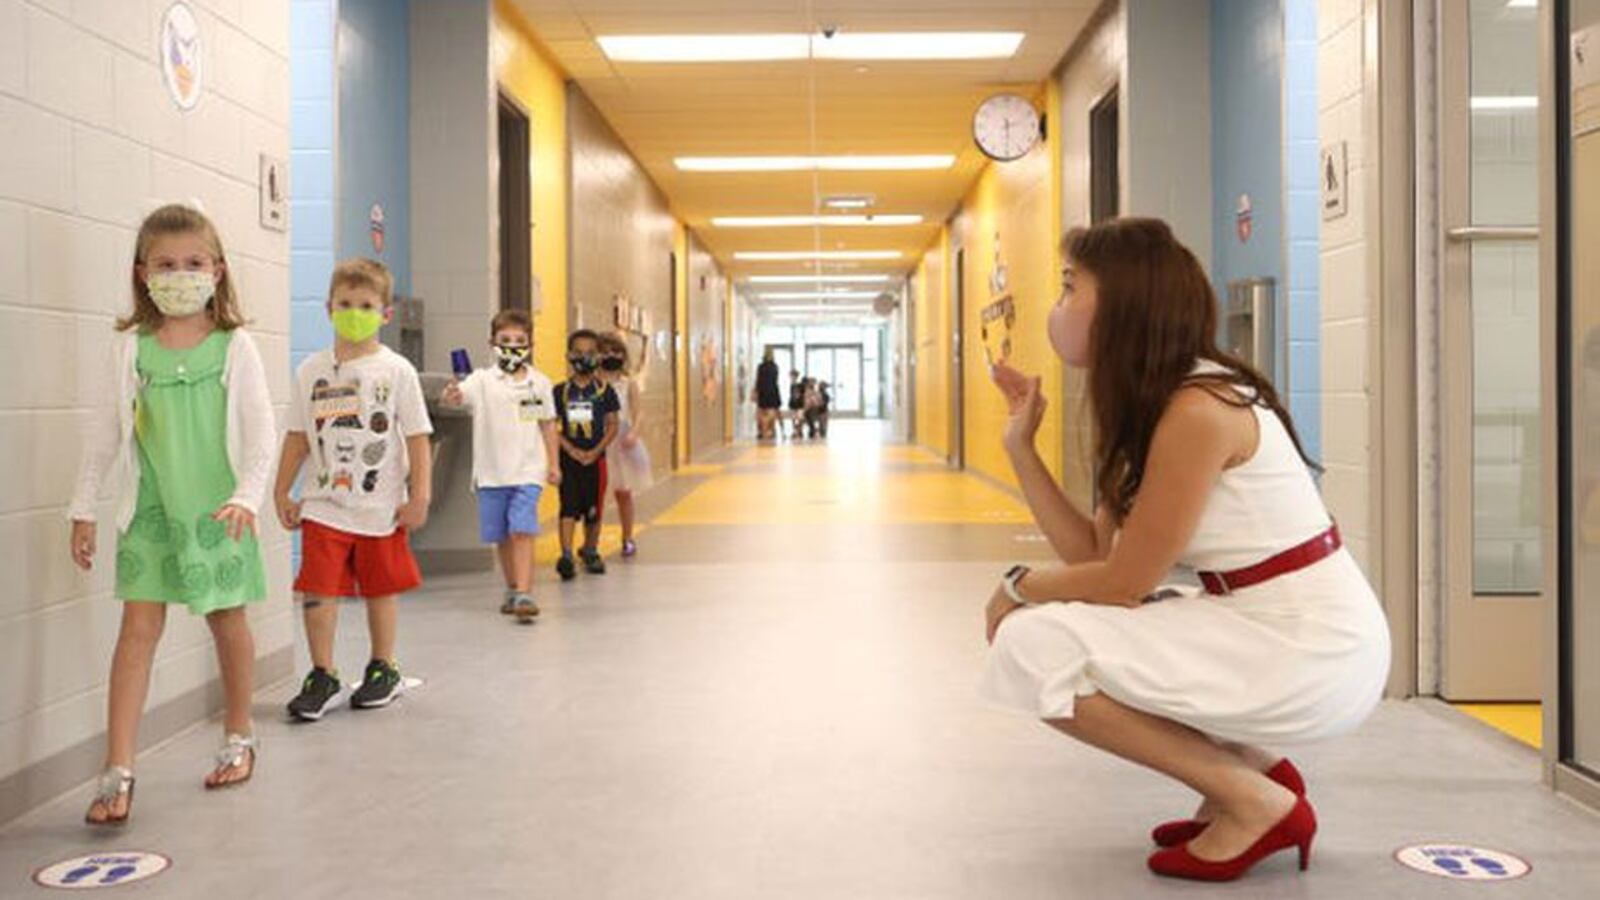 Woman in white sleeveless shift with red patent belt and shoes squats in school hallway, waving at a line of elementary children walking past.